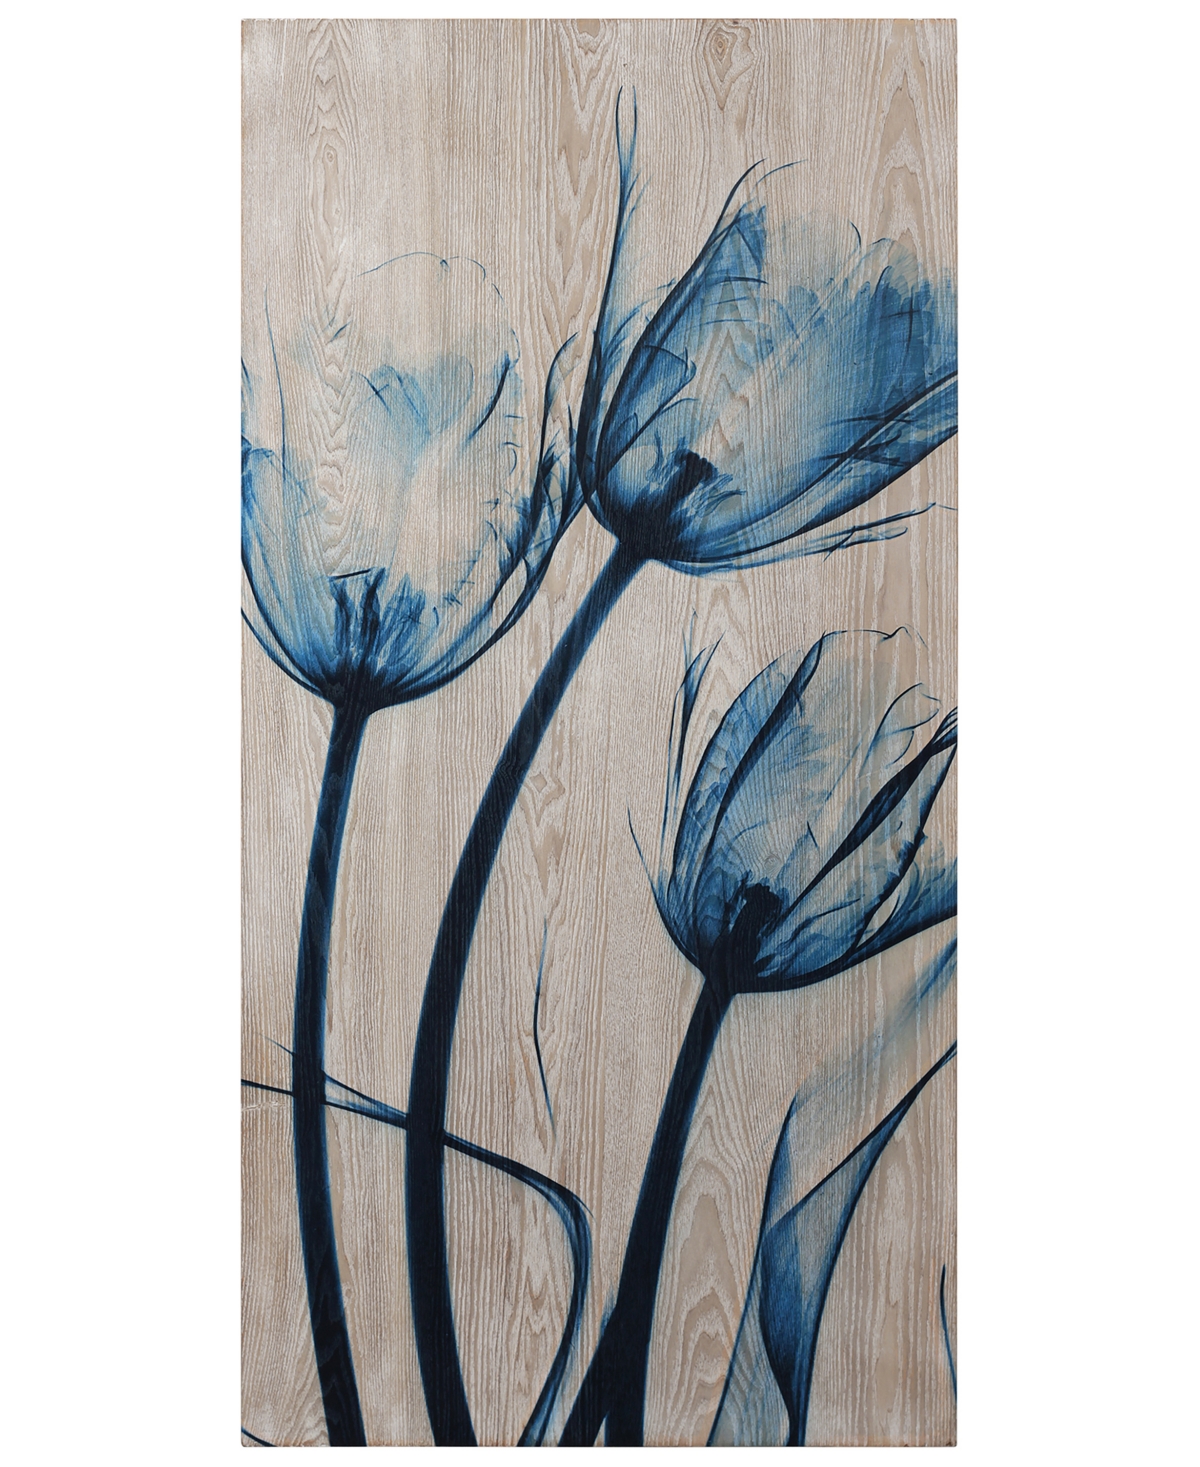 Empire Art Direct "tulips Is Blue" Fine Radiographic Photography Giclee Printed Directly On Hand Finished Ash Wood Wal